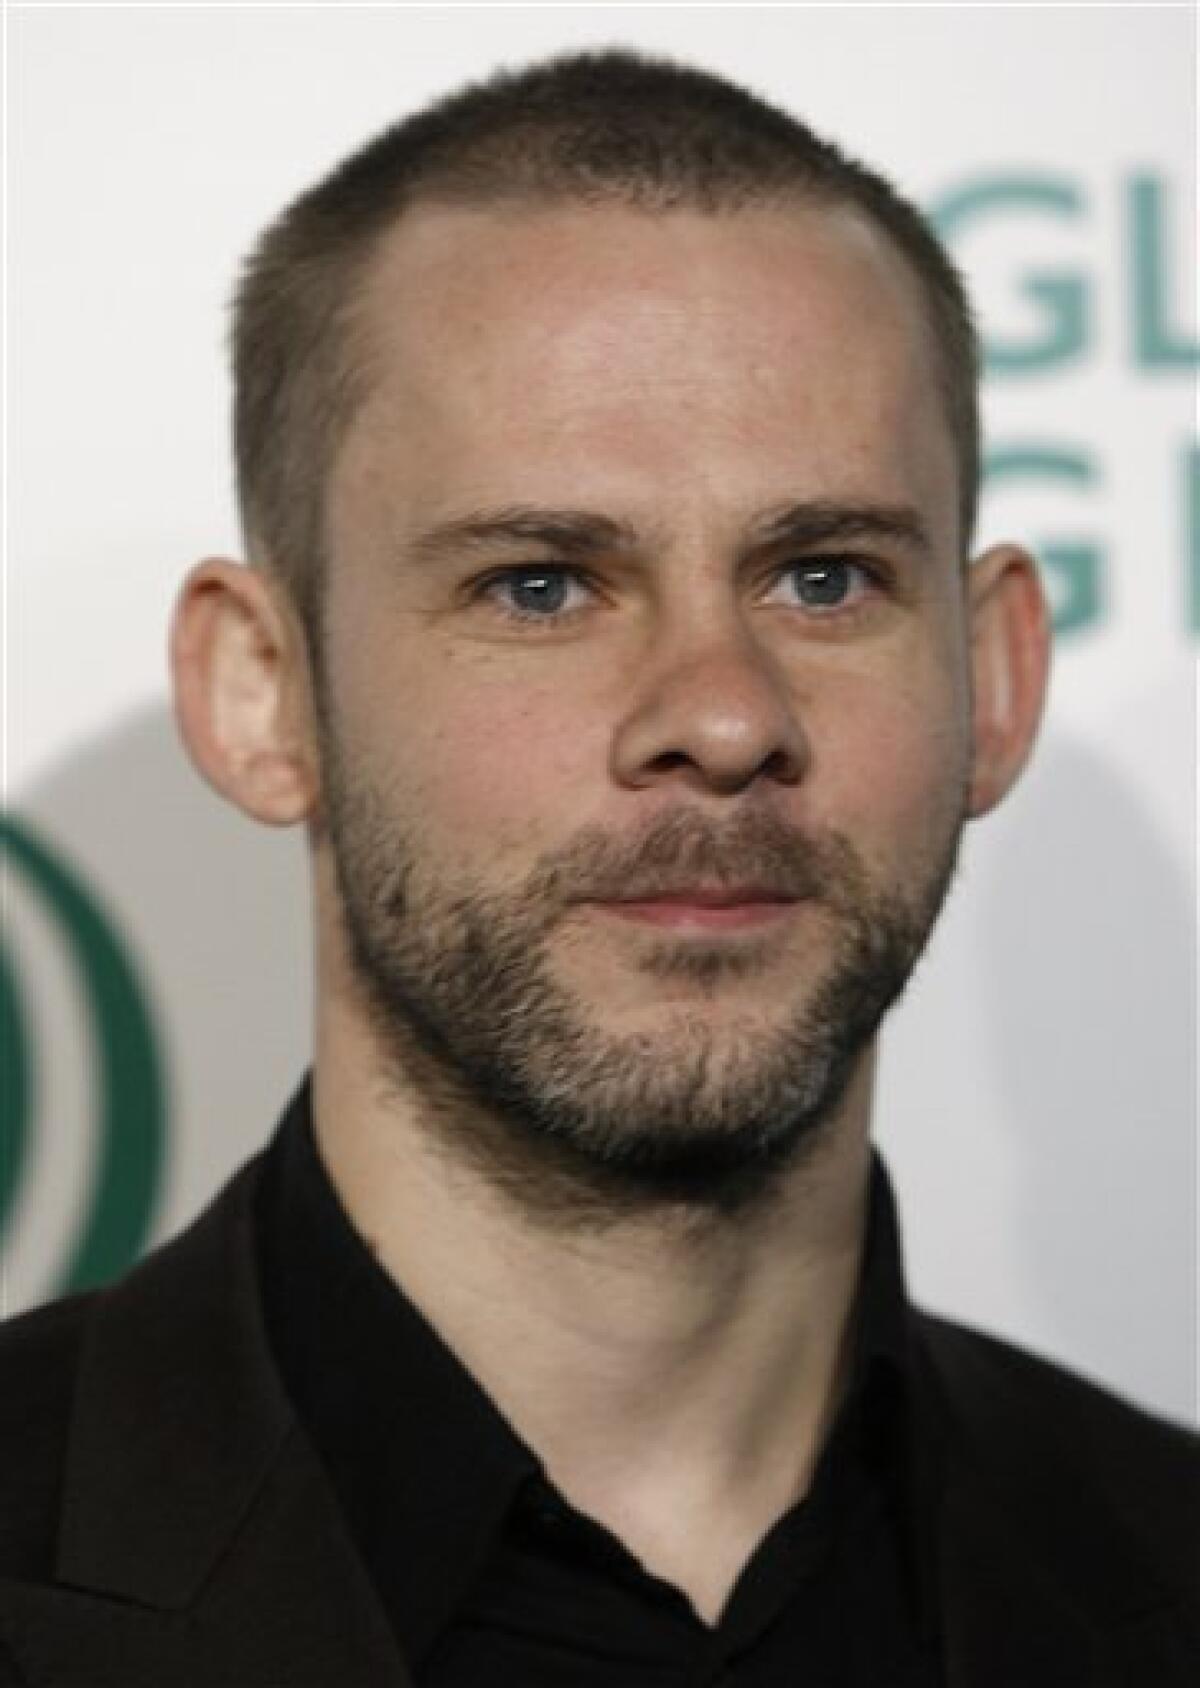 FILE - In this Feb. 19, 2009, file photo, Dominic Monaghan arrives at Global Green's 6th Annual Pre-Oscar party in Los Angeles. (AP Photo/Matt Sayles, file)